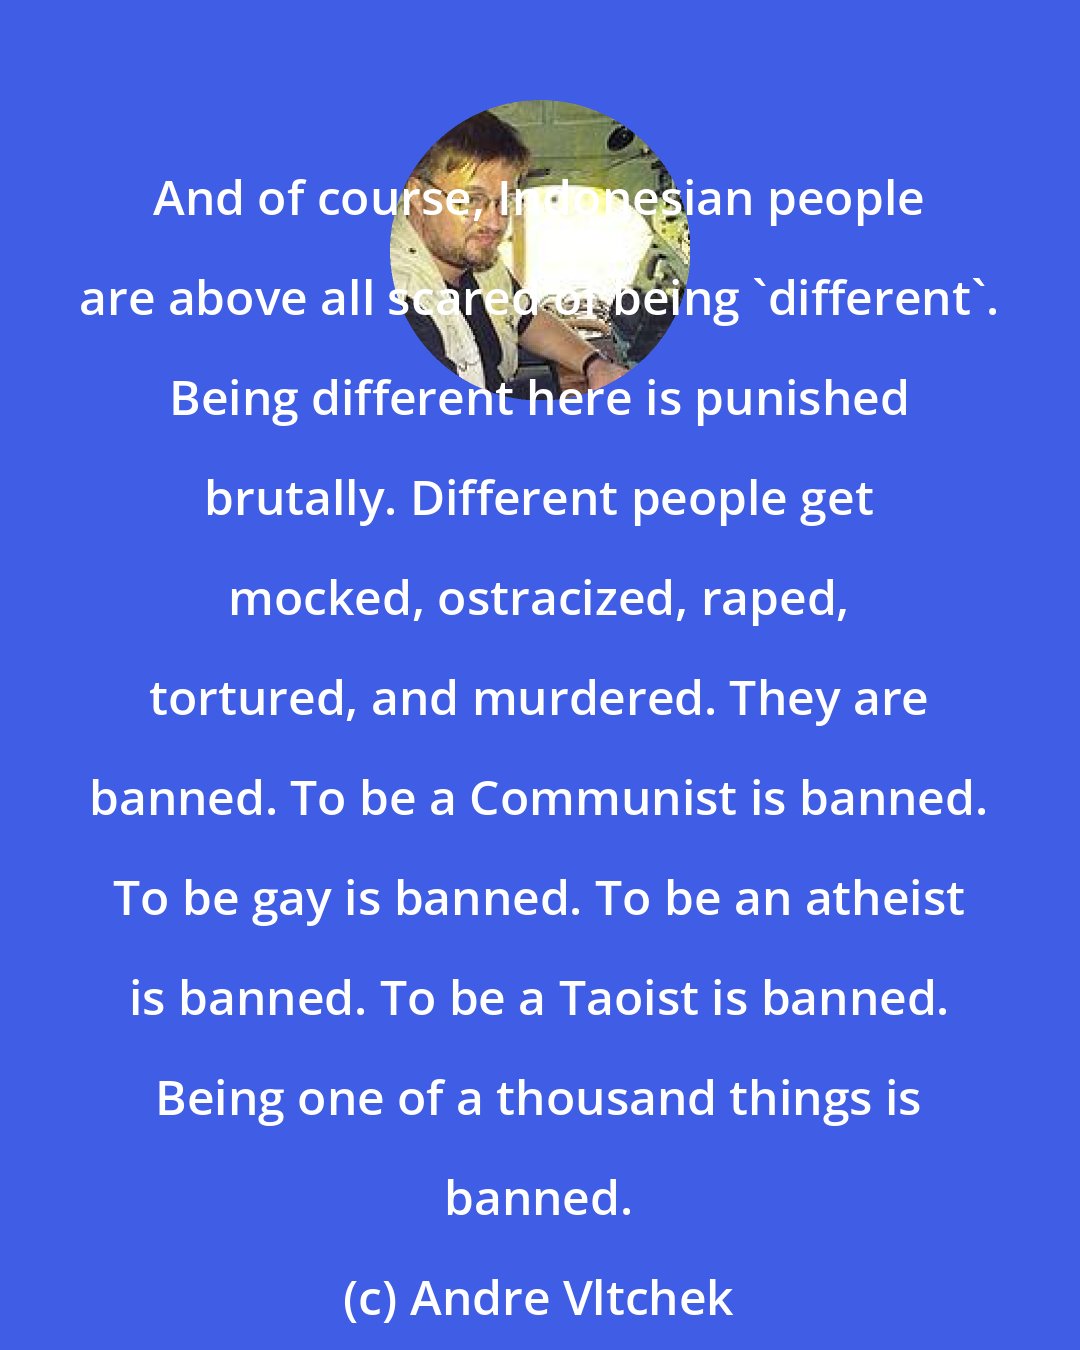 Andre Vltchek: And of course, Indonesian people are above all scared of being 'different'. Being different here is punished brutally. Different people get mocked, ostracized, raped, tortured, and murdered. They are banned. To be a Communist is banned. To be gay is banned. To be an atheist is banned. To be a Taoist is banned. Being one of a thousand things is banned.